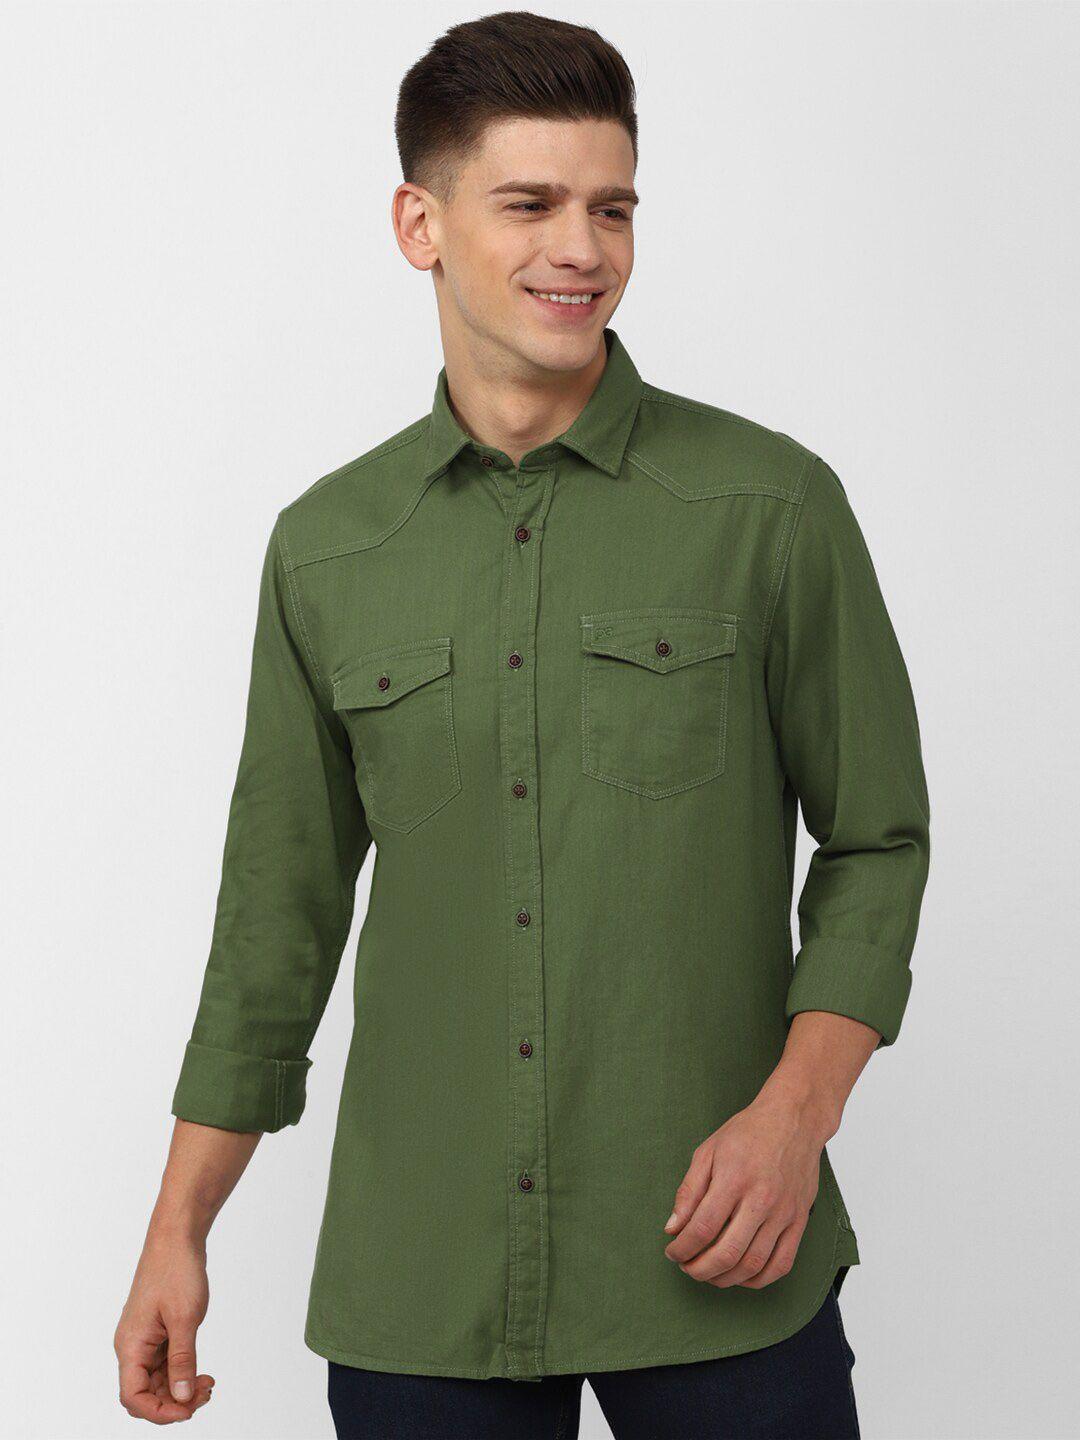 peter england casuals men olive green solid cotton slim fit casual shirt